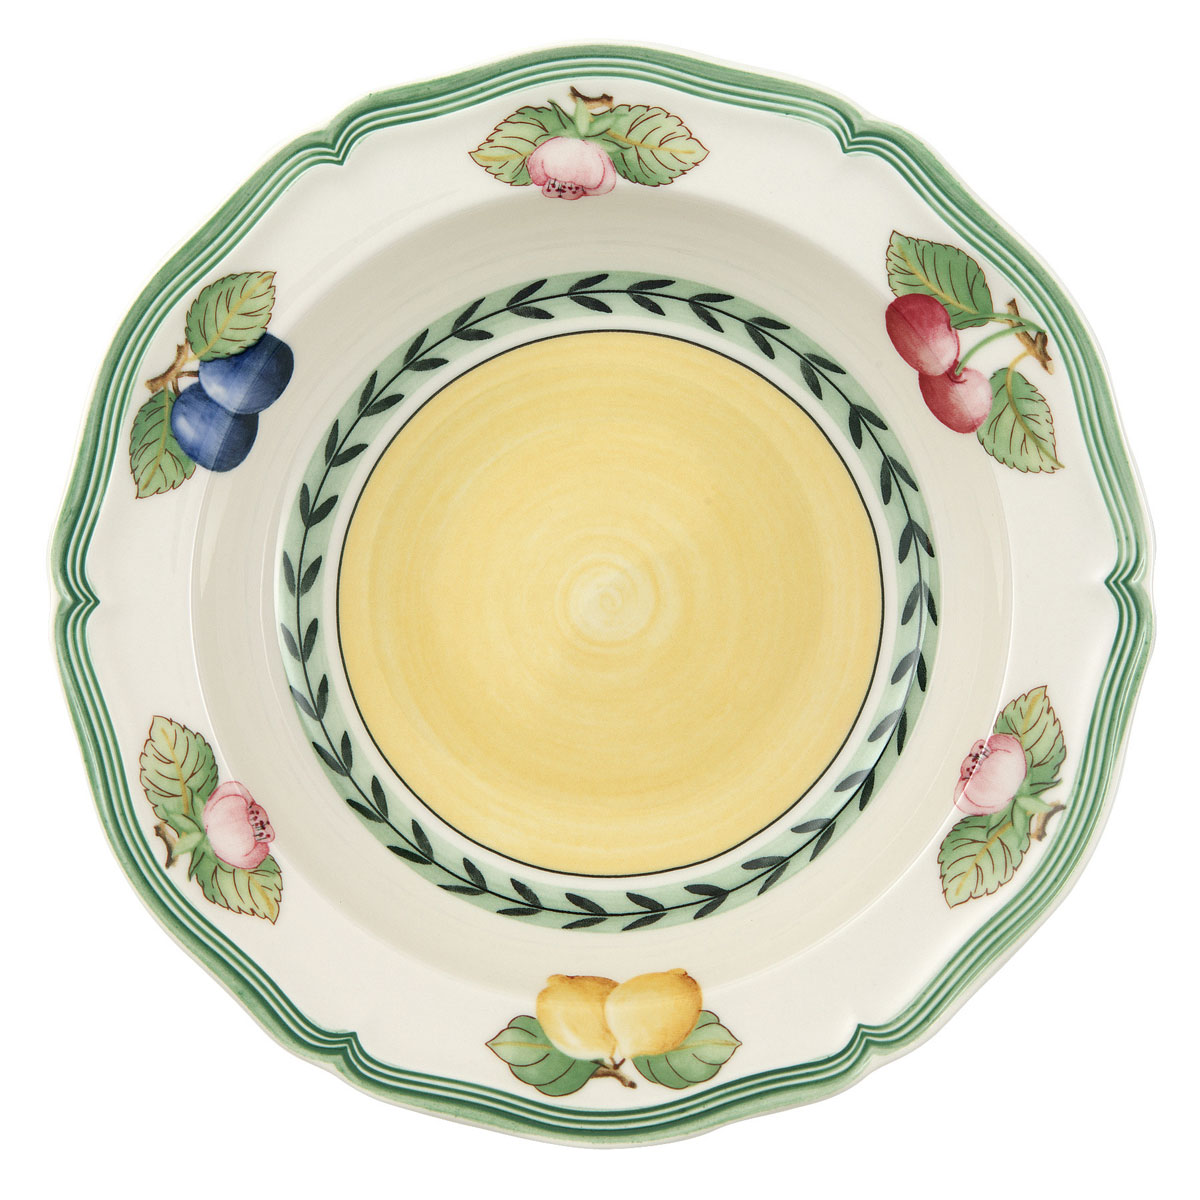 Villeroy and Boch French Garden Fleurence Rim Cereal Bowl